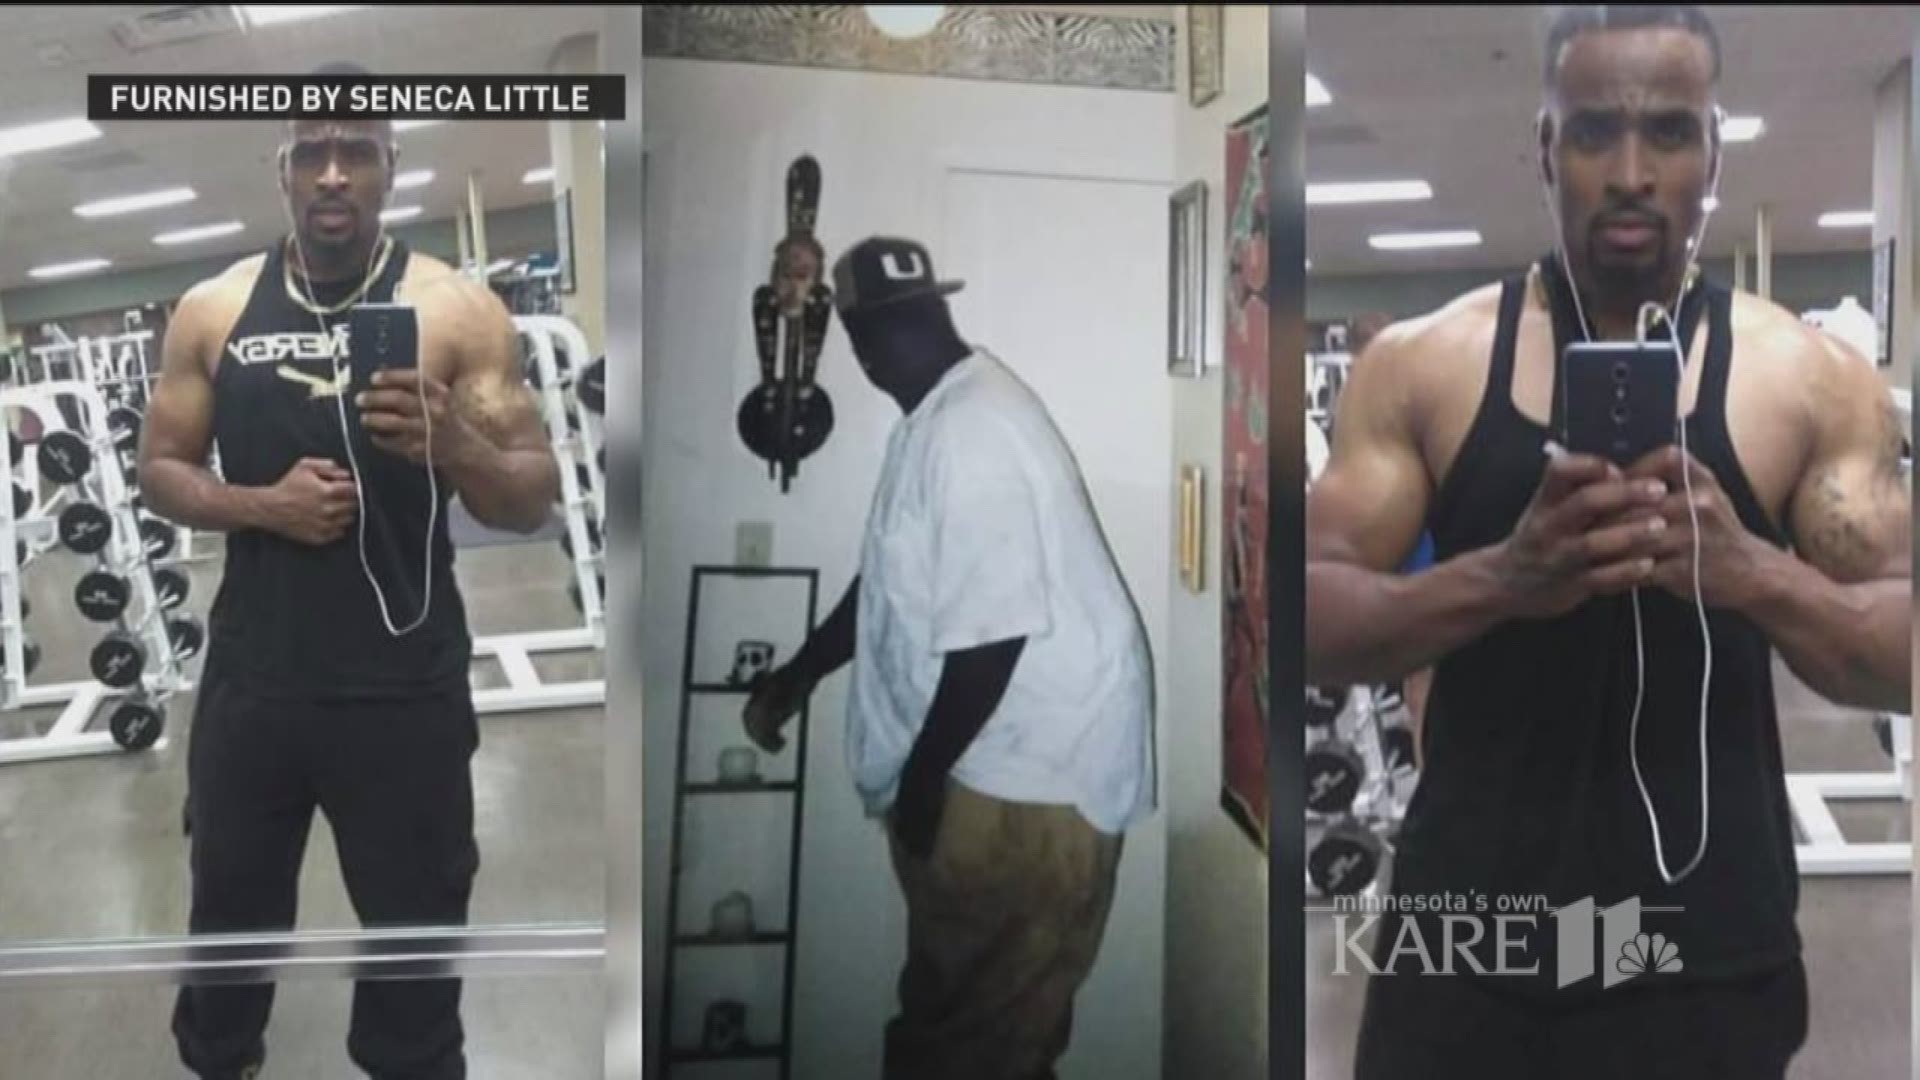 Since losing 200 pounds eight years ago, Seneca Little has dreamed of helping others with their own fitness journeys. Now, he's launched Senergy Supplements. http://kare11.tv/2wgOgNL